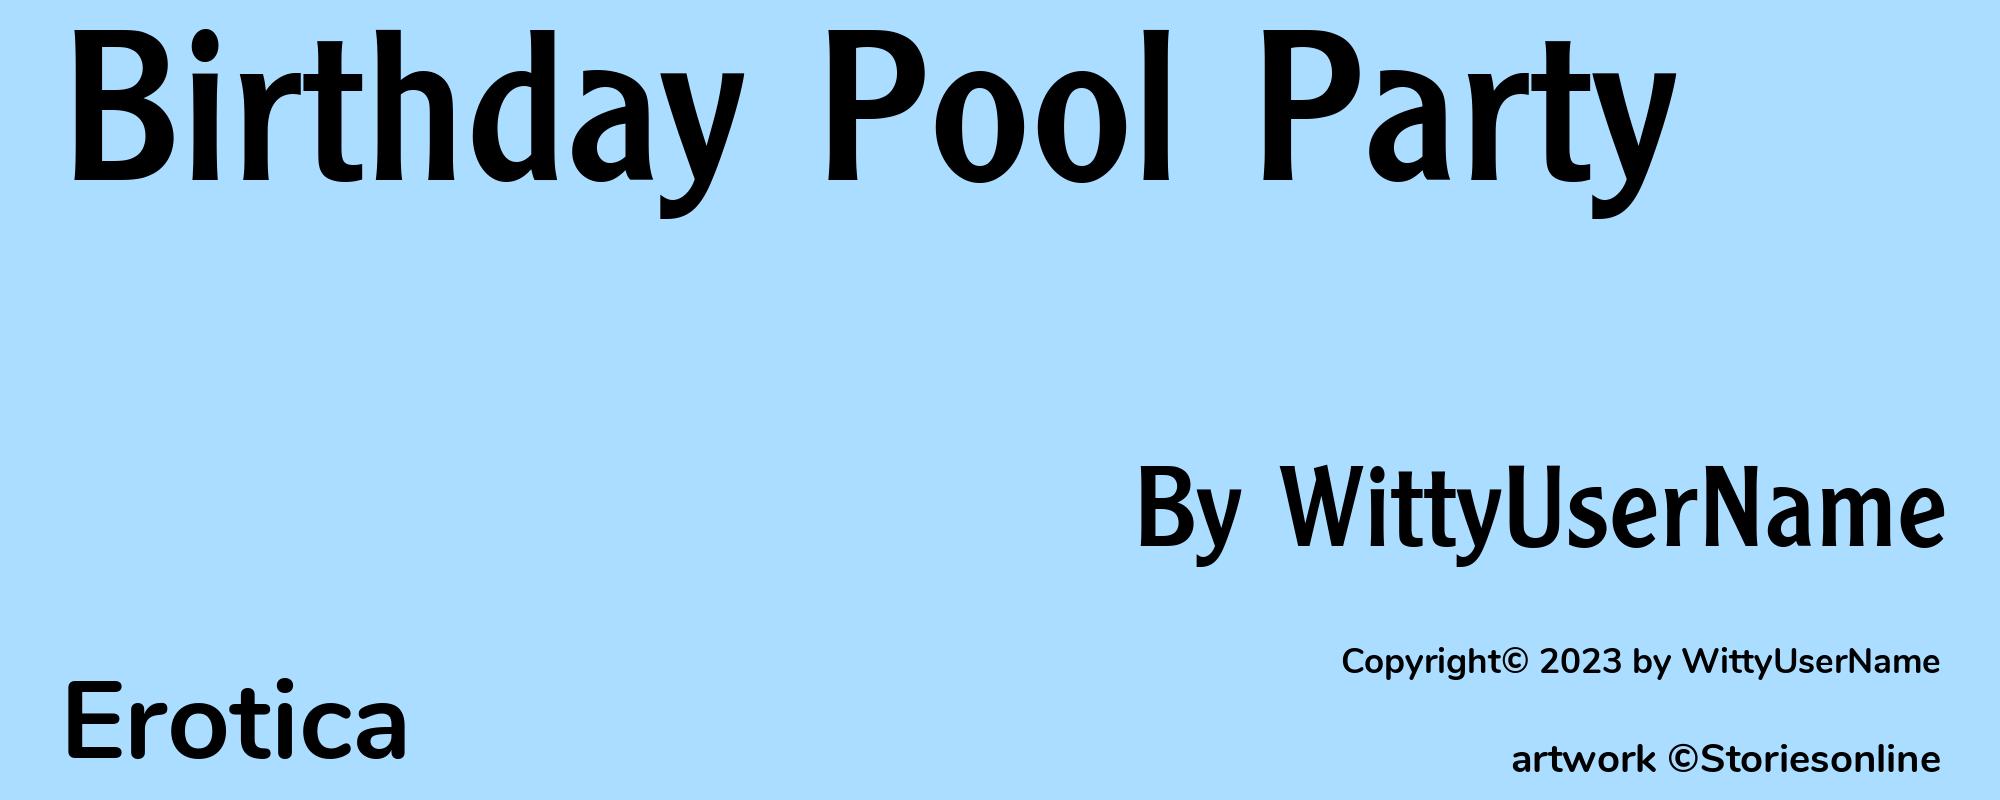 Birthday Pool Party - Cover